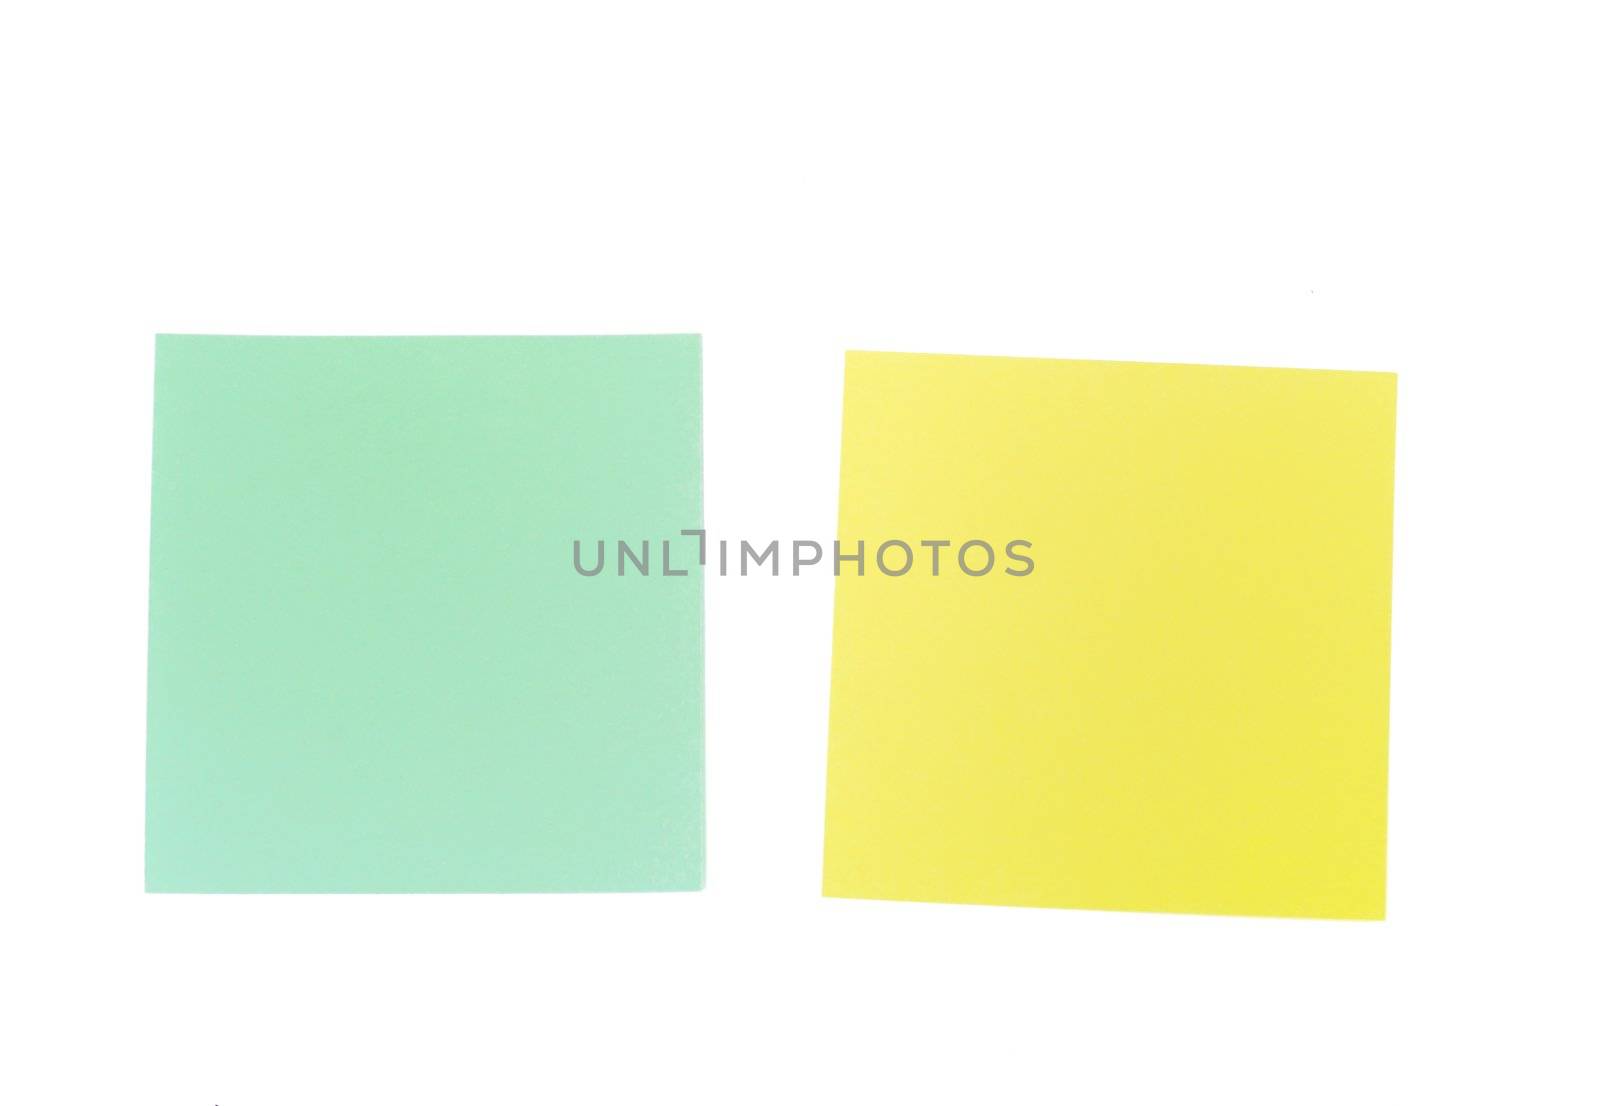 An image of yellow and green sticky notes on white